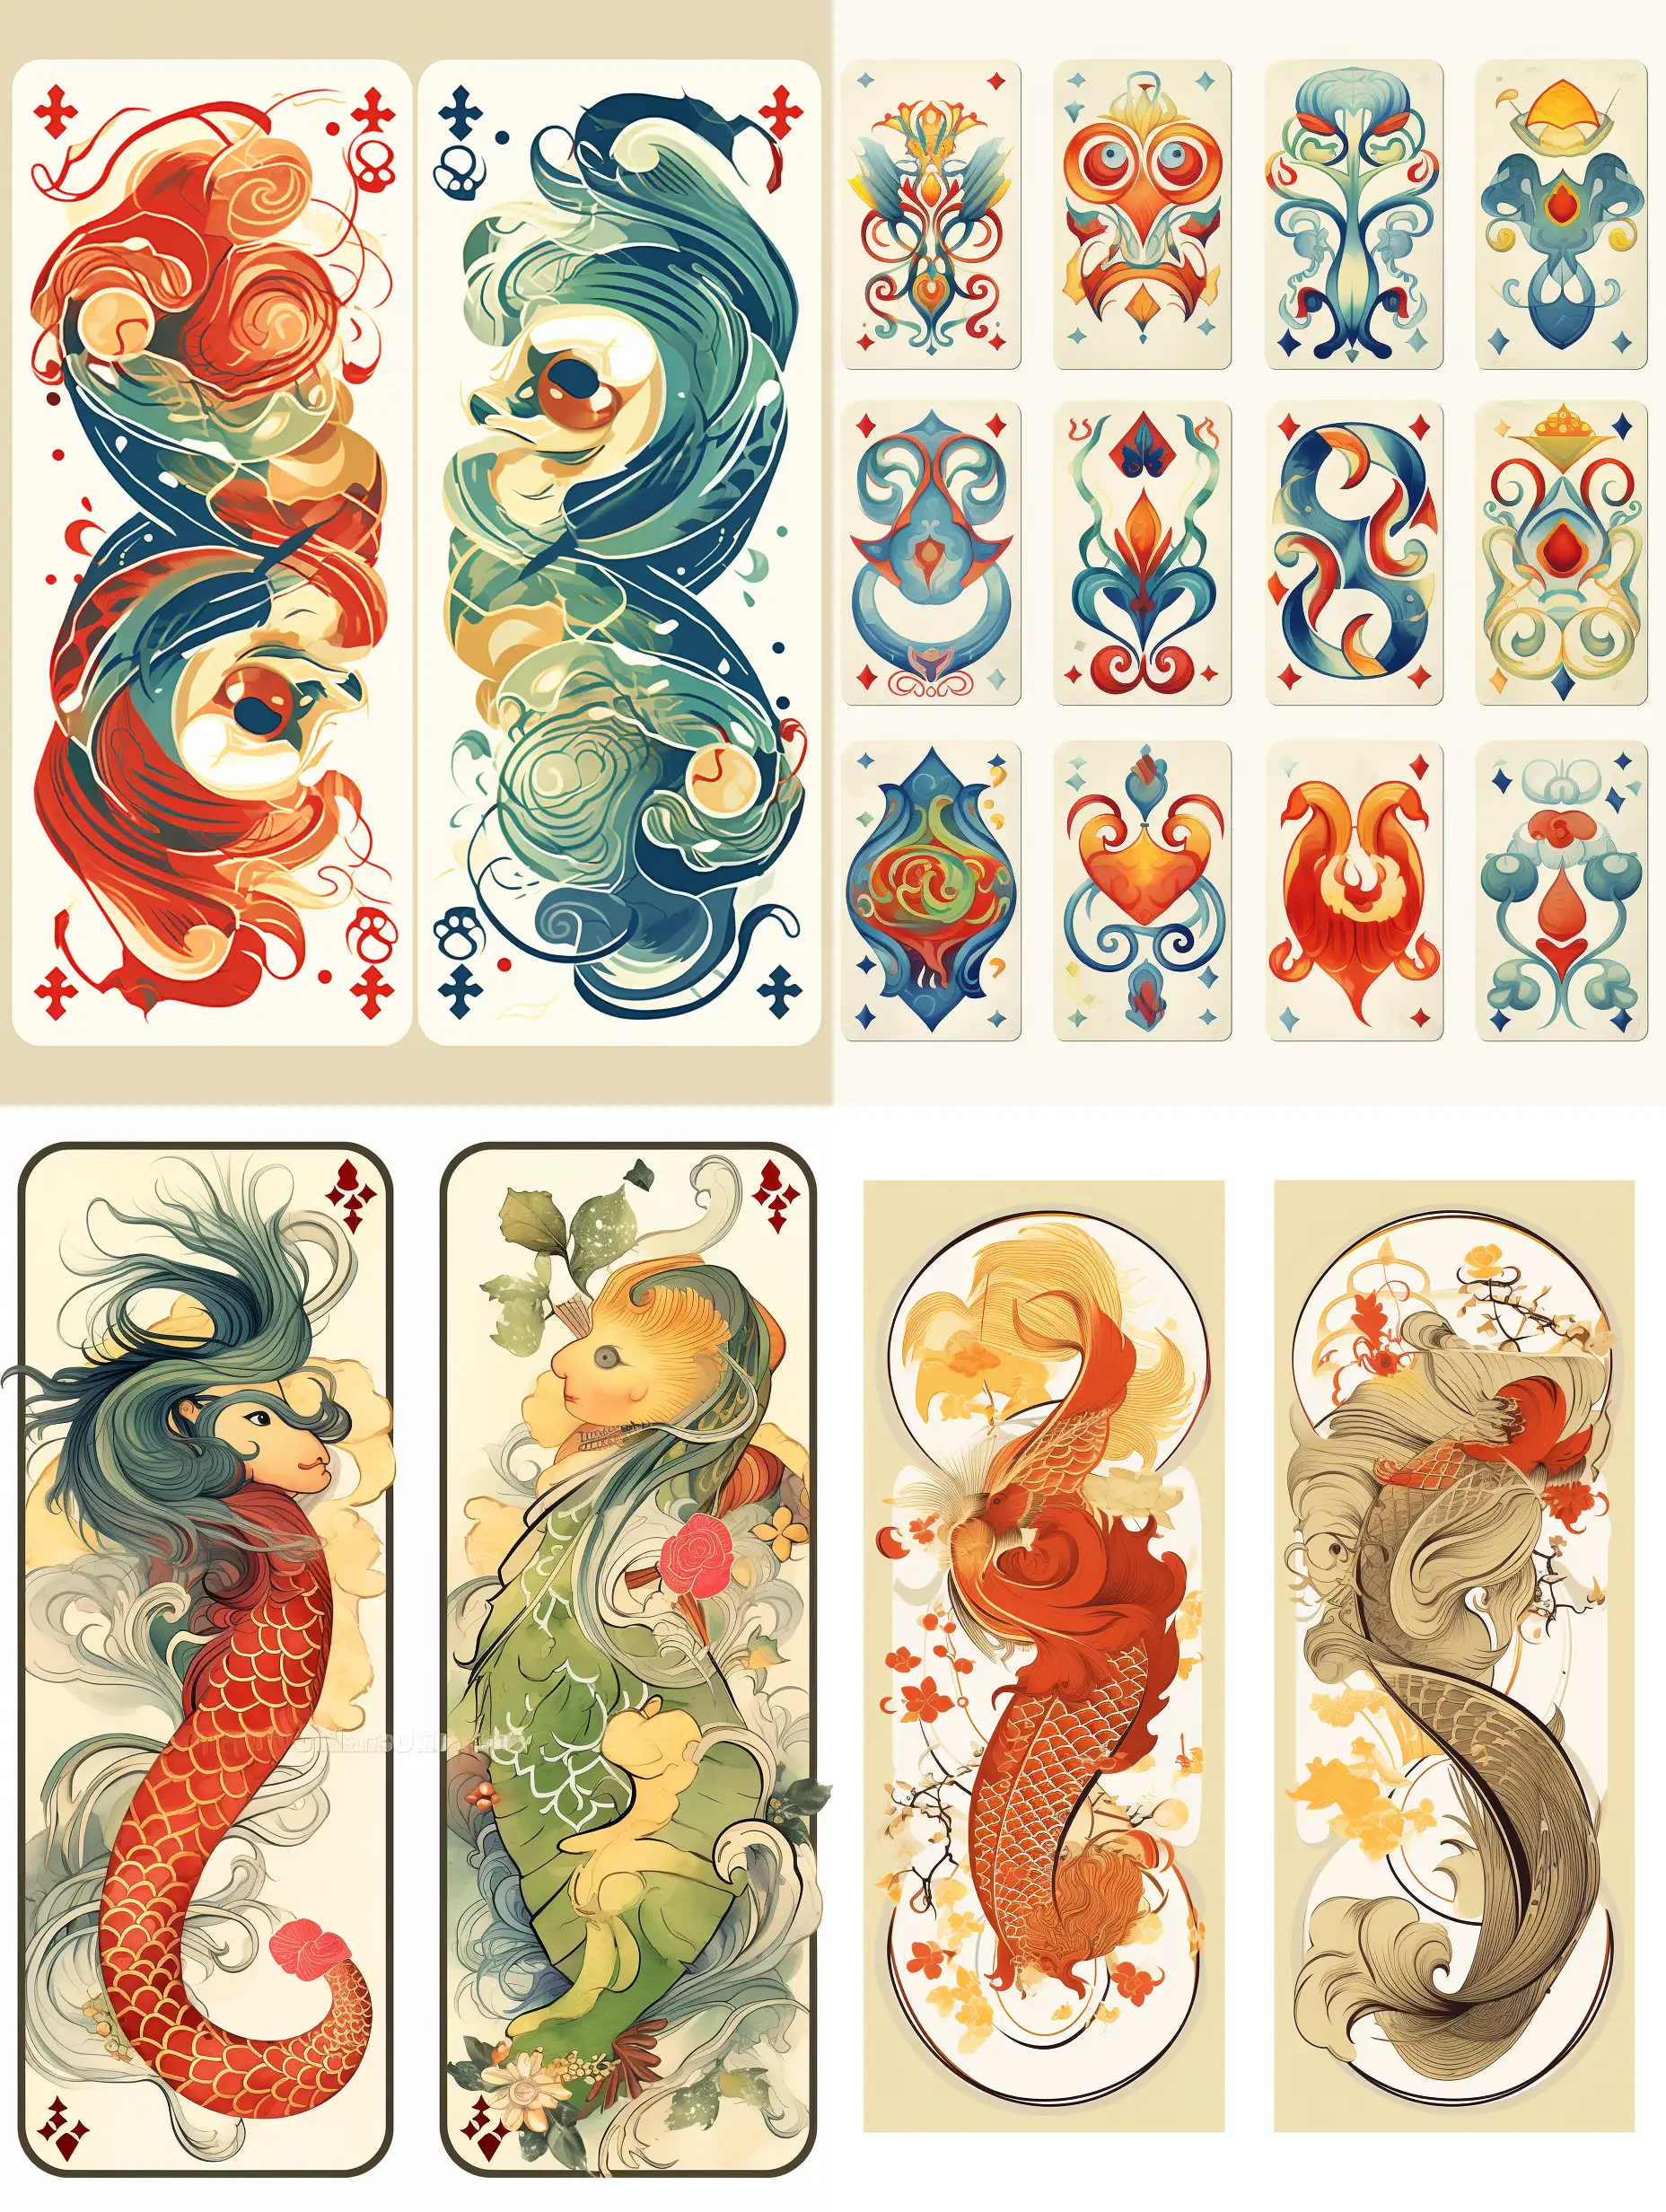 one variants of design of a playing card backside, ornament ancient civilization, fairy-tale illustration, stylized caricature, Victo Ngai, watercolor, drawing, decorative, flat drawing.chinese new year , chinese dragon in center one variants of design of a playing card backside, ornament ancient civilization, fairy-tale illustration, stylized caricature, Victo Ngai, watercolor, drawing, decorative, flat drawing.chinese new year , chinese dragon in center